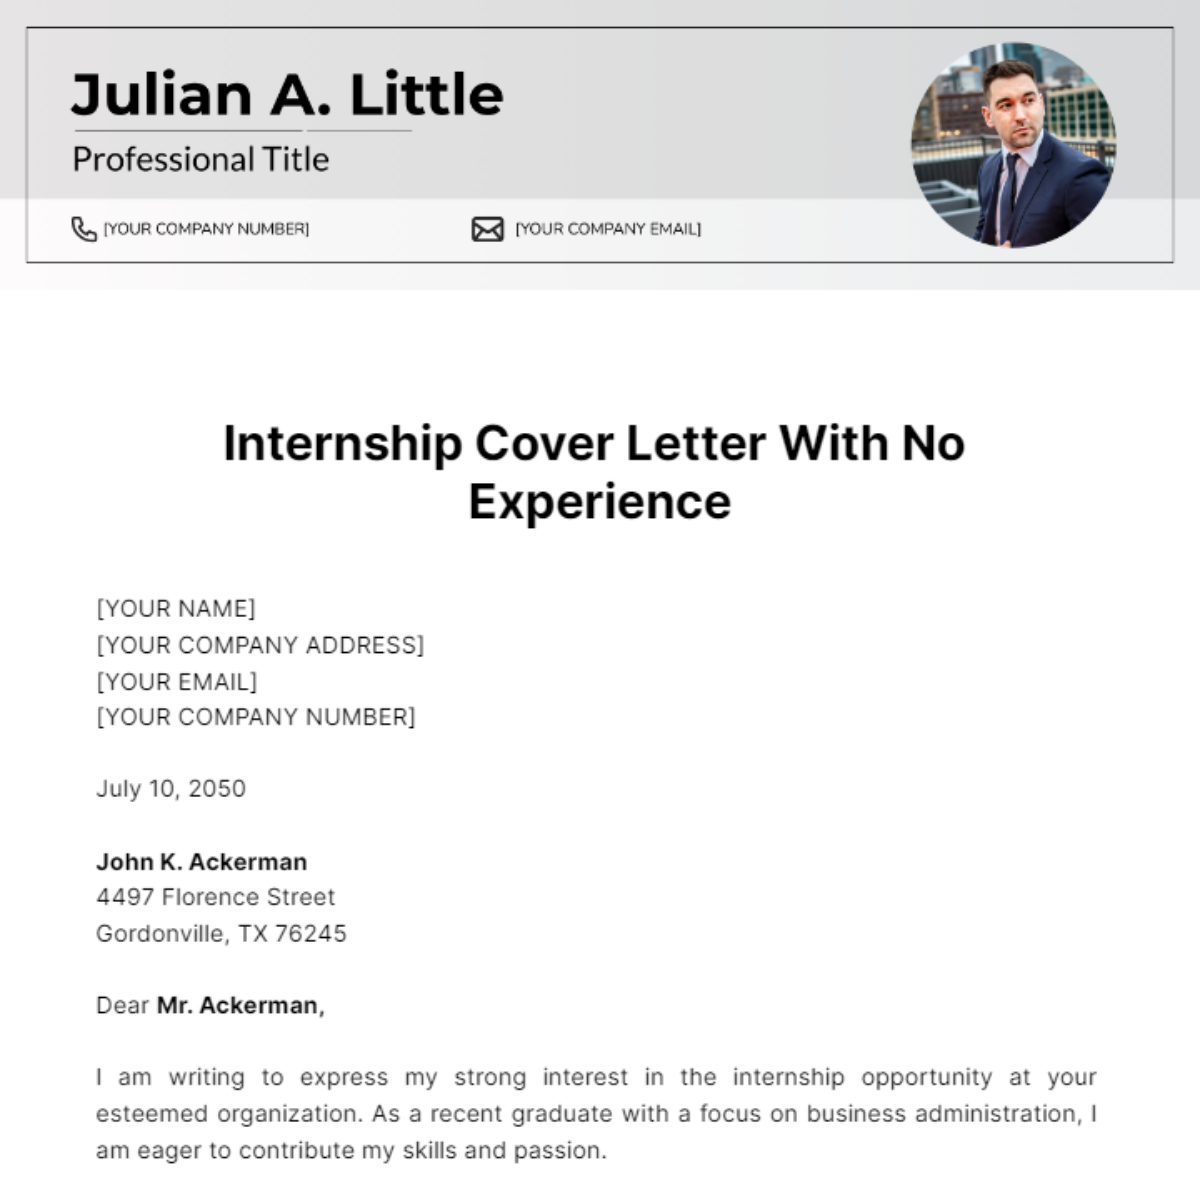 Internship Cover Letter With No Experience Template